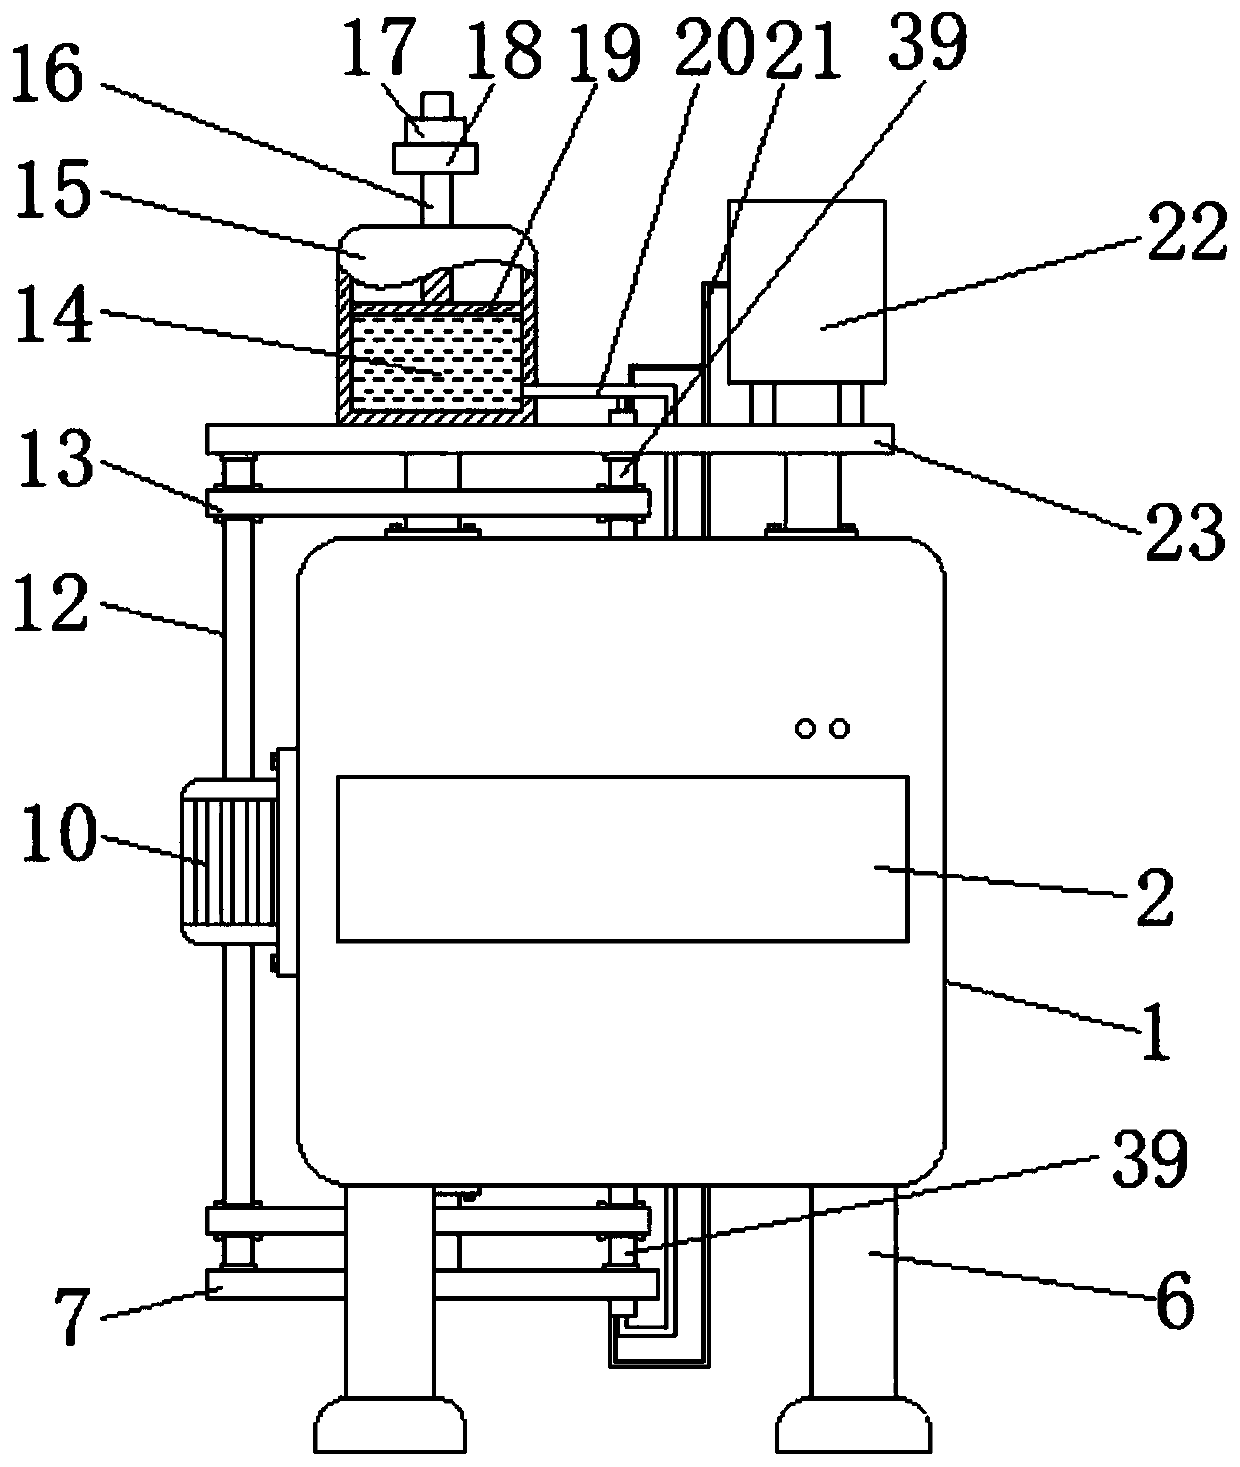 Building template grinding device